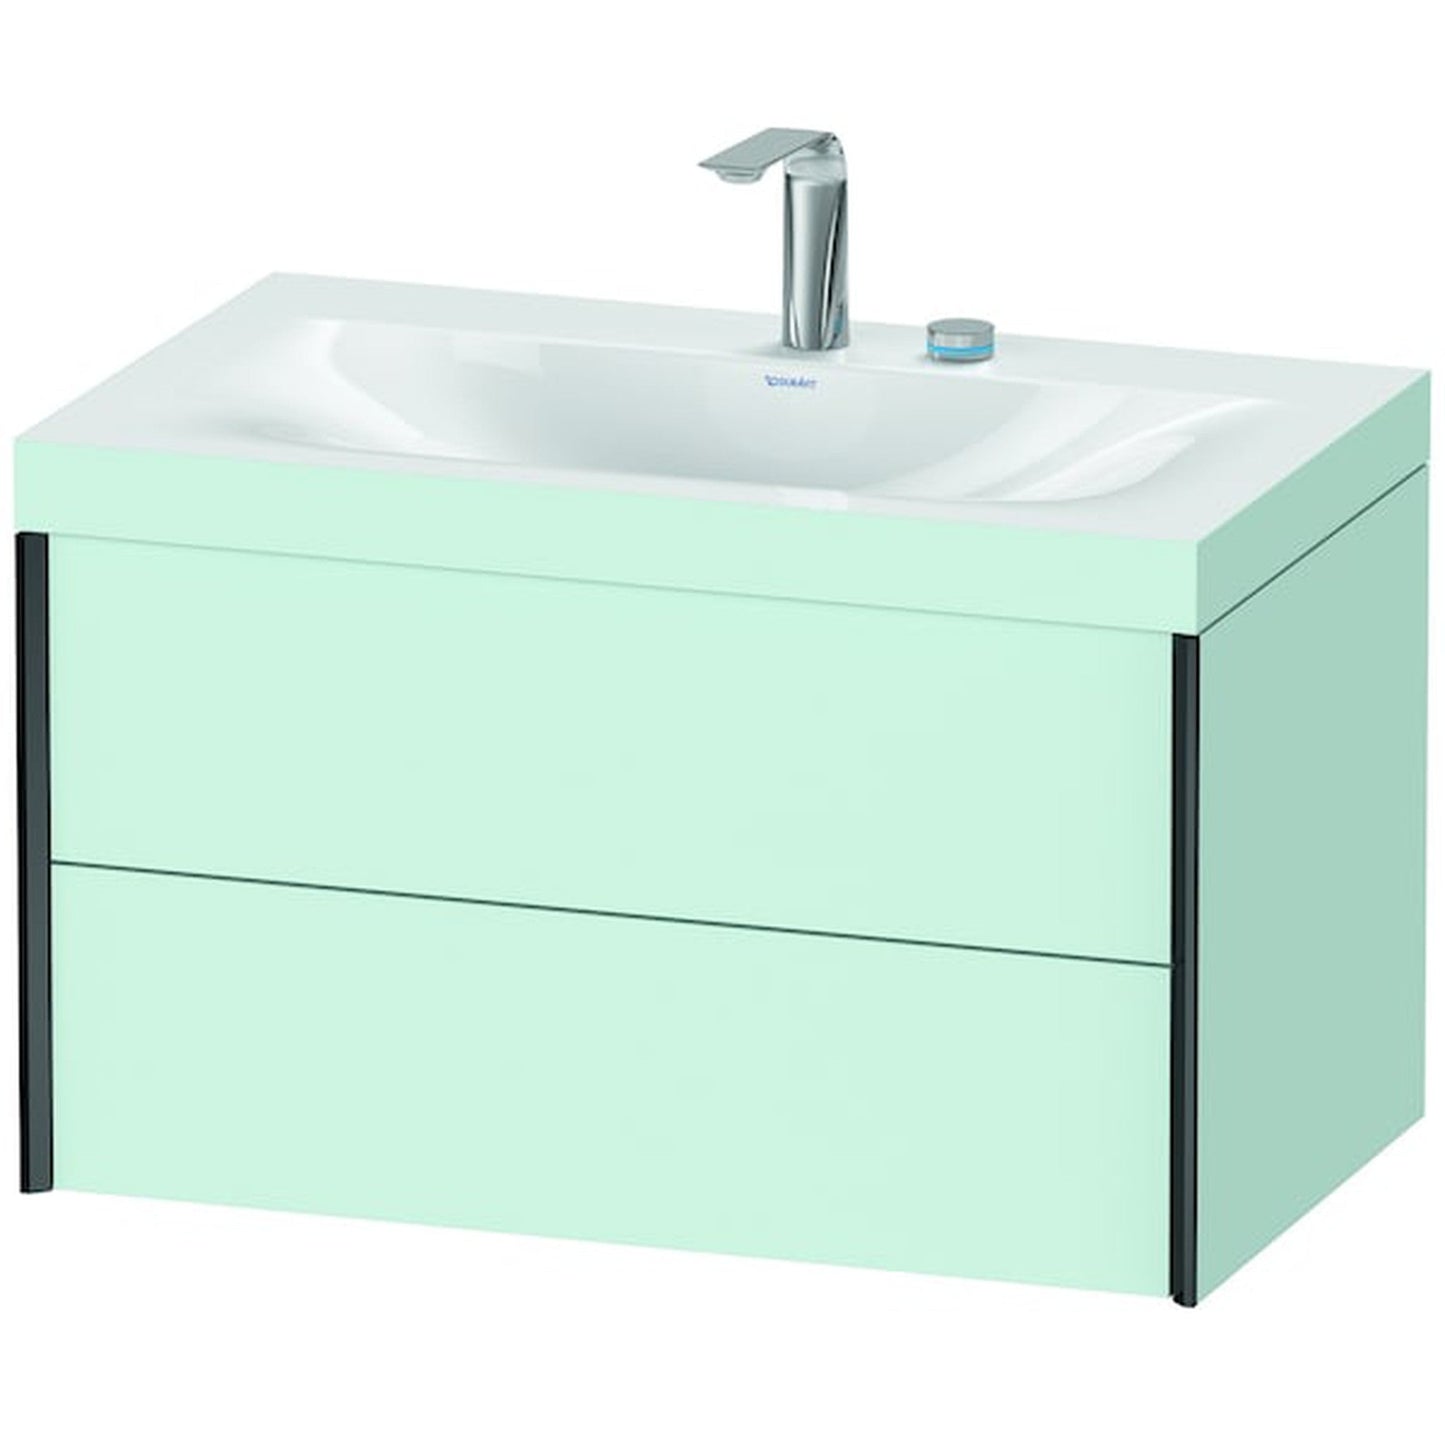 Duravit Xviu 31" x 20" x 19" Two Drawer C-Bonded Wall-Mount Vanity Kit With Two Tap Holes, Light Blue (XV4615EB209C)